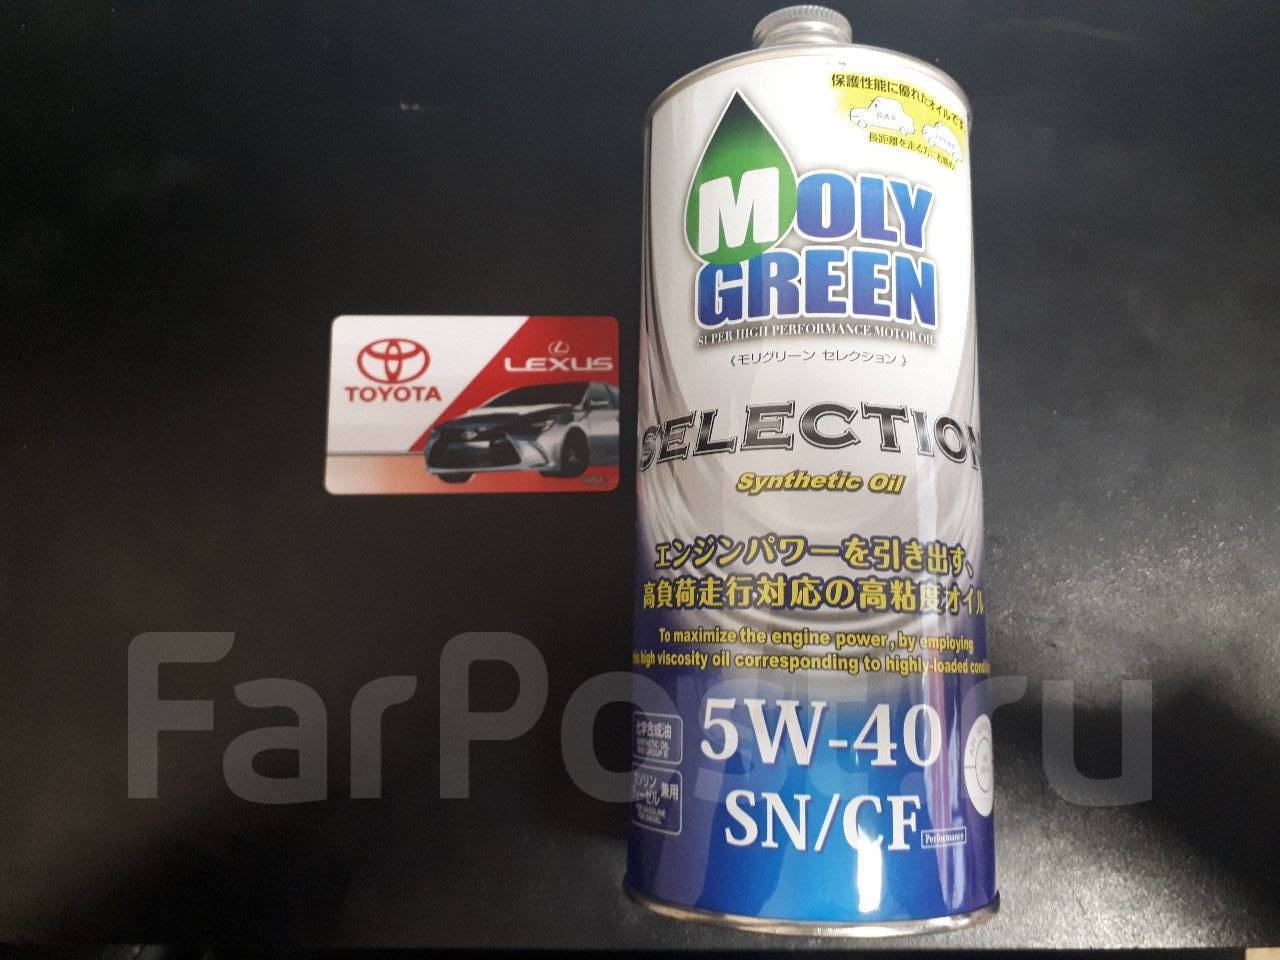 Moly green 5w40. Moly Green selection 5w40. Масло Moly Green 5w40. Selection SN/CF 5w40.